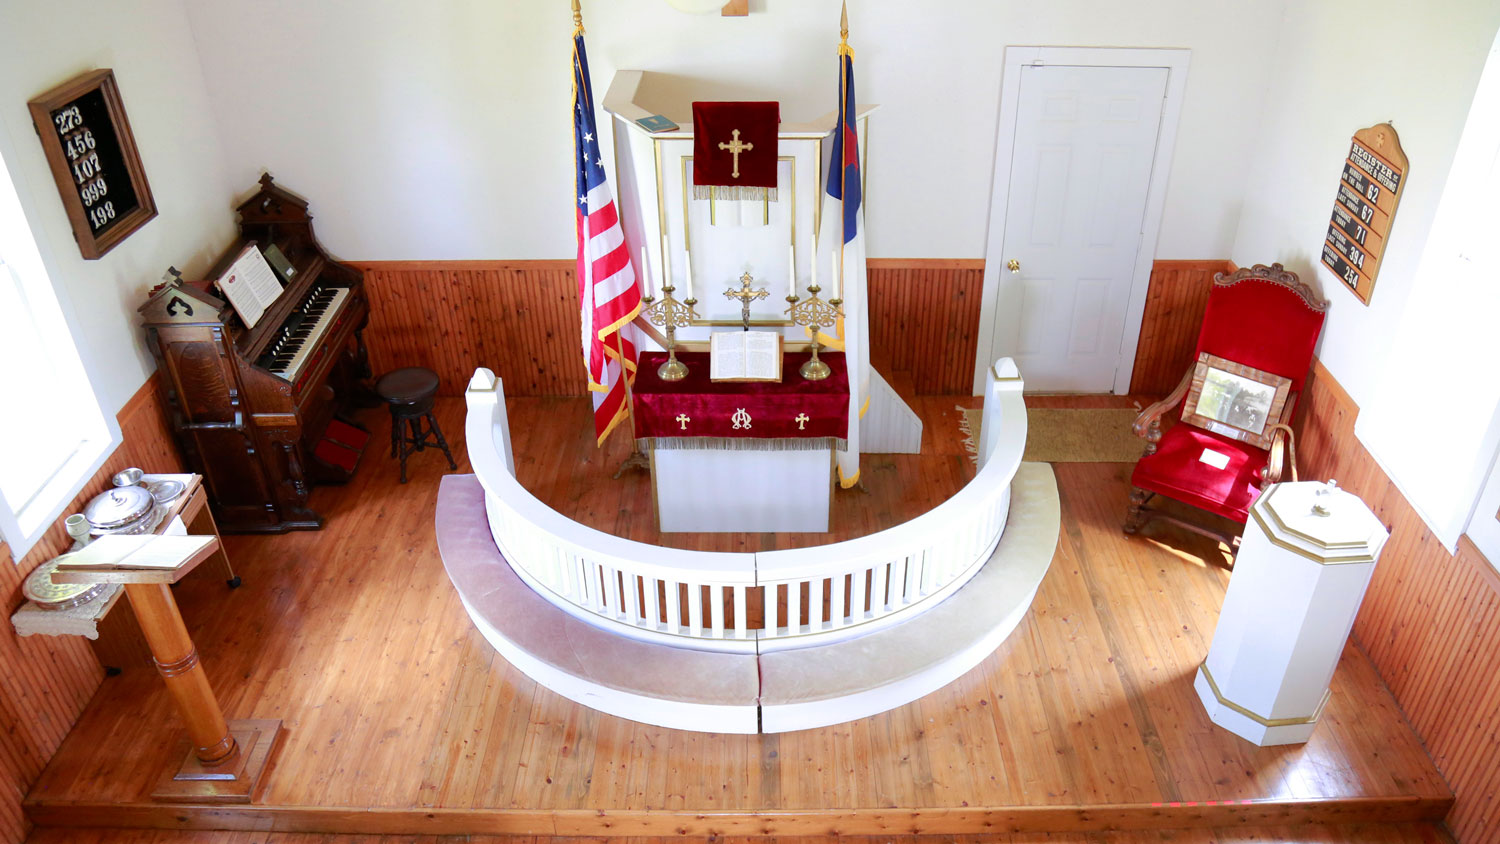 Interior view of altar and communion rail in Pioneer Church